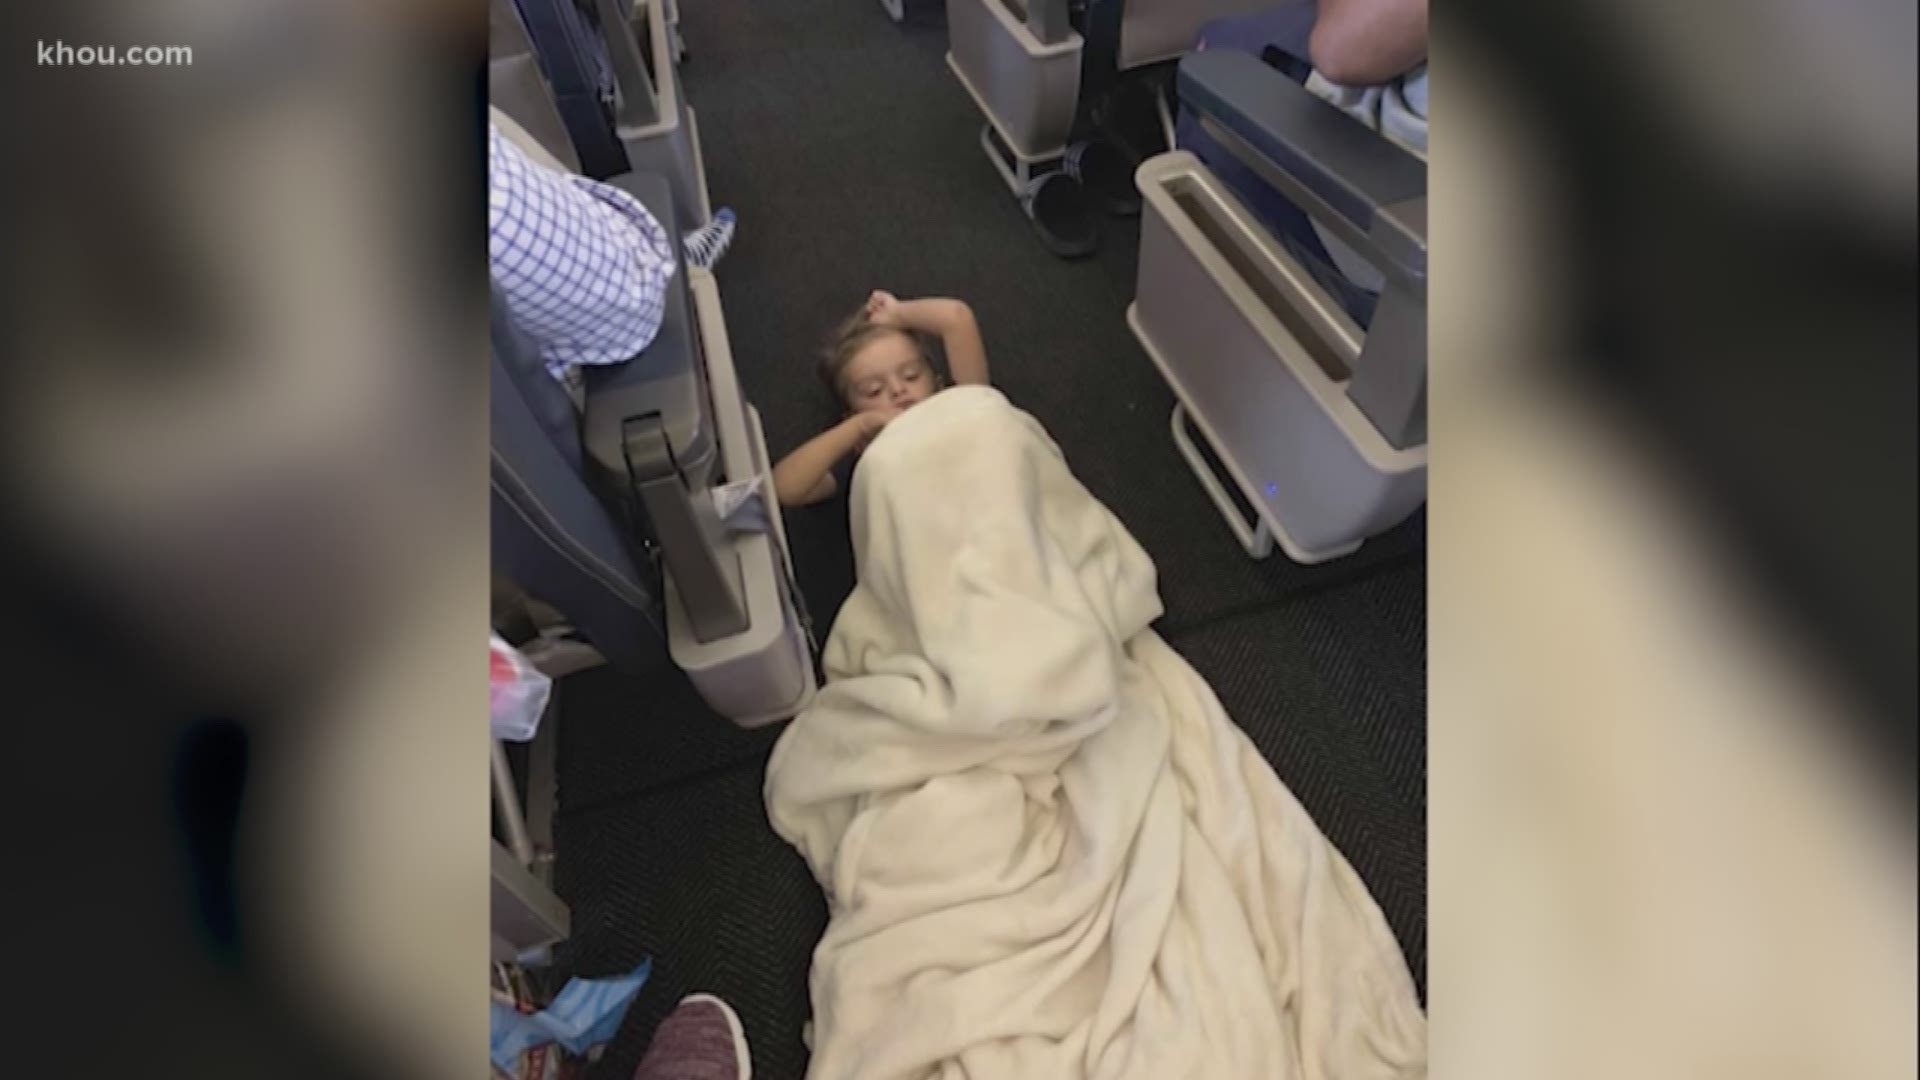 A Cypress mother and her son who has autism was showered with kindness on their flight home after the 4-year-old had a meltdown on the plane.